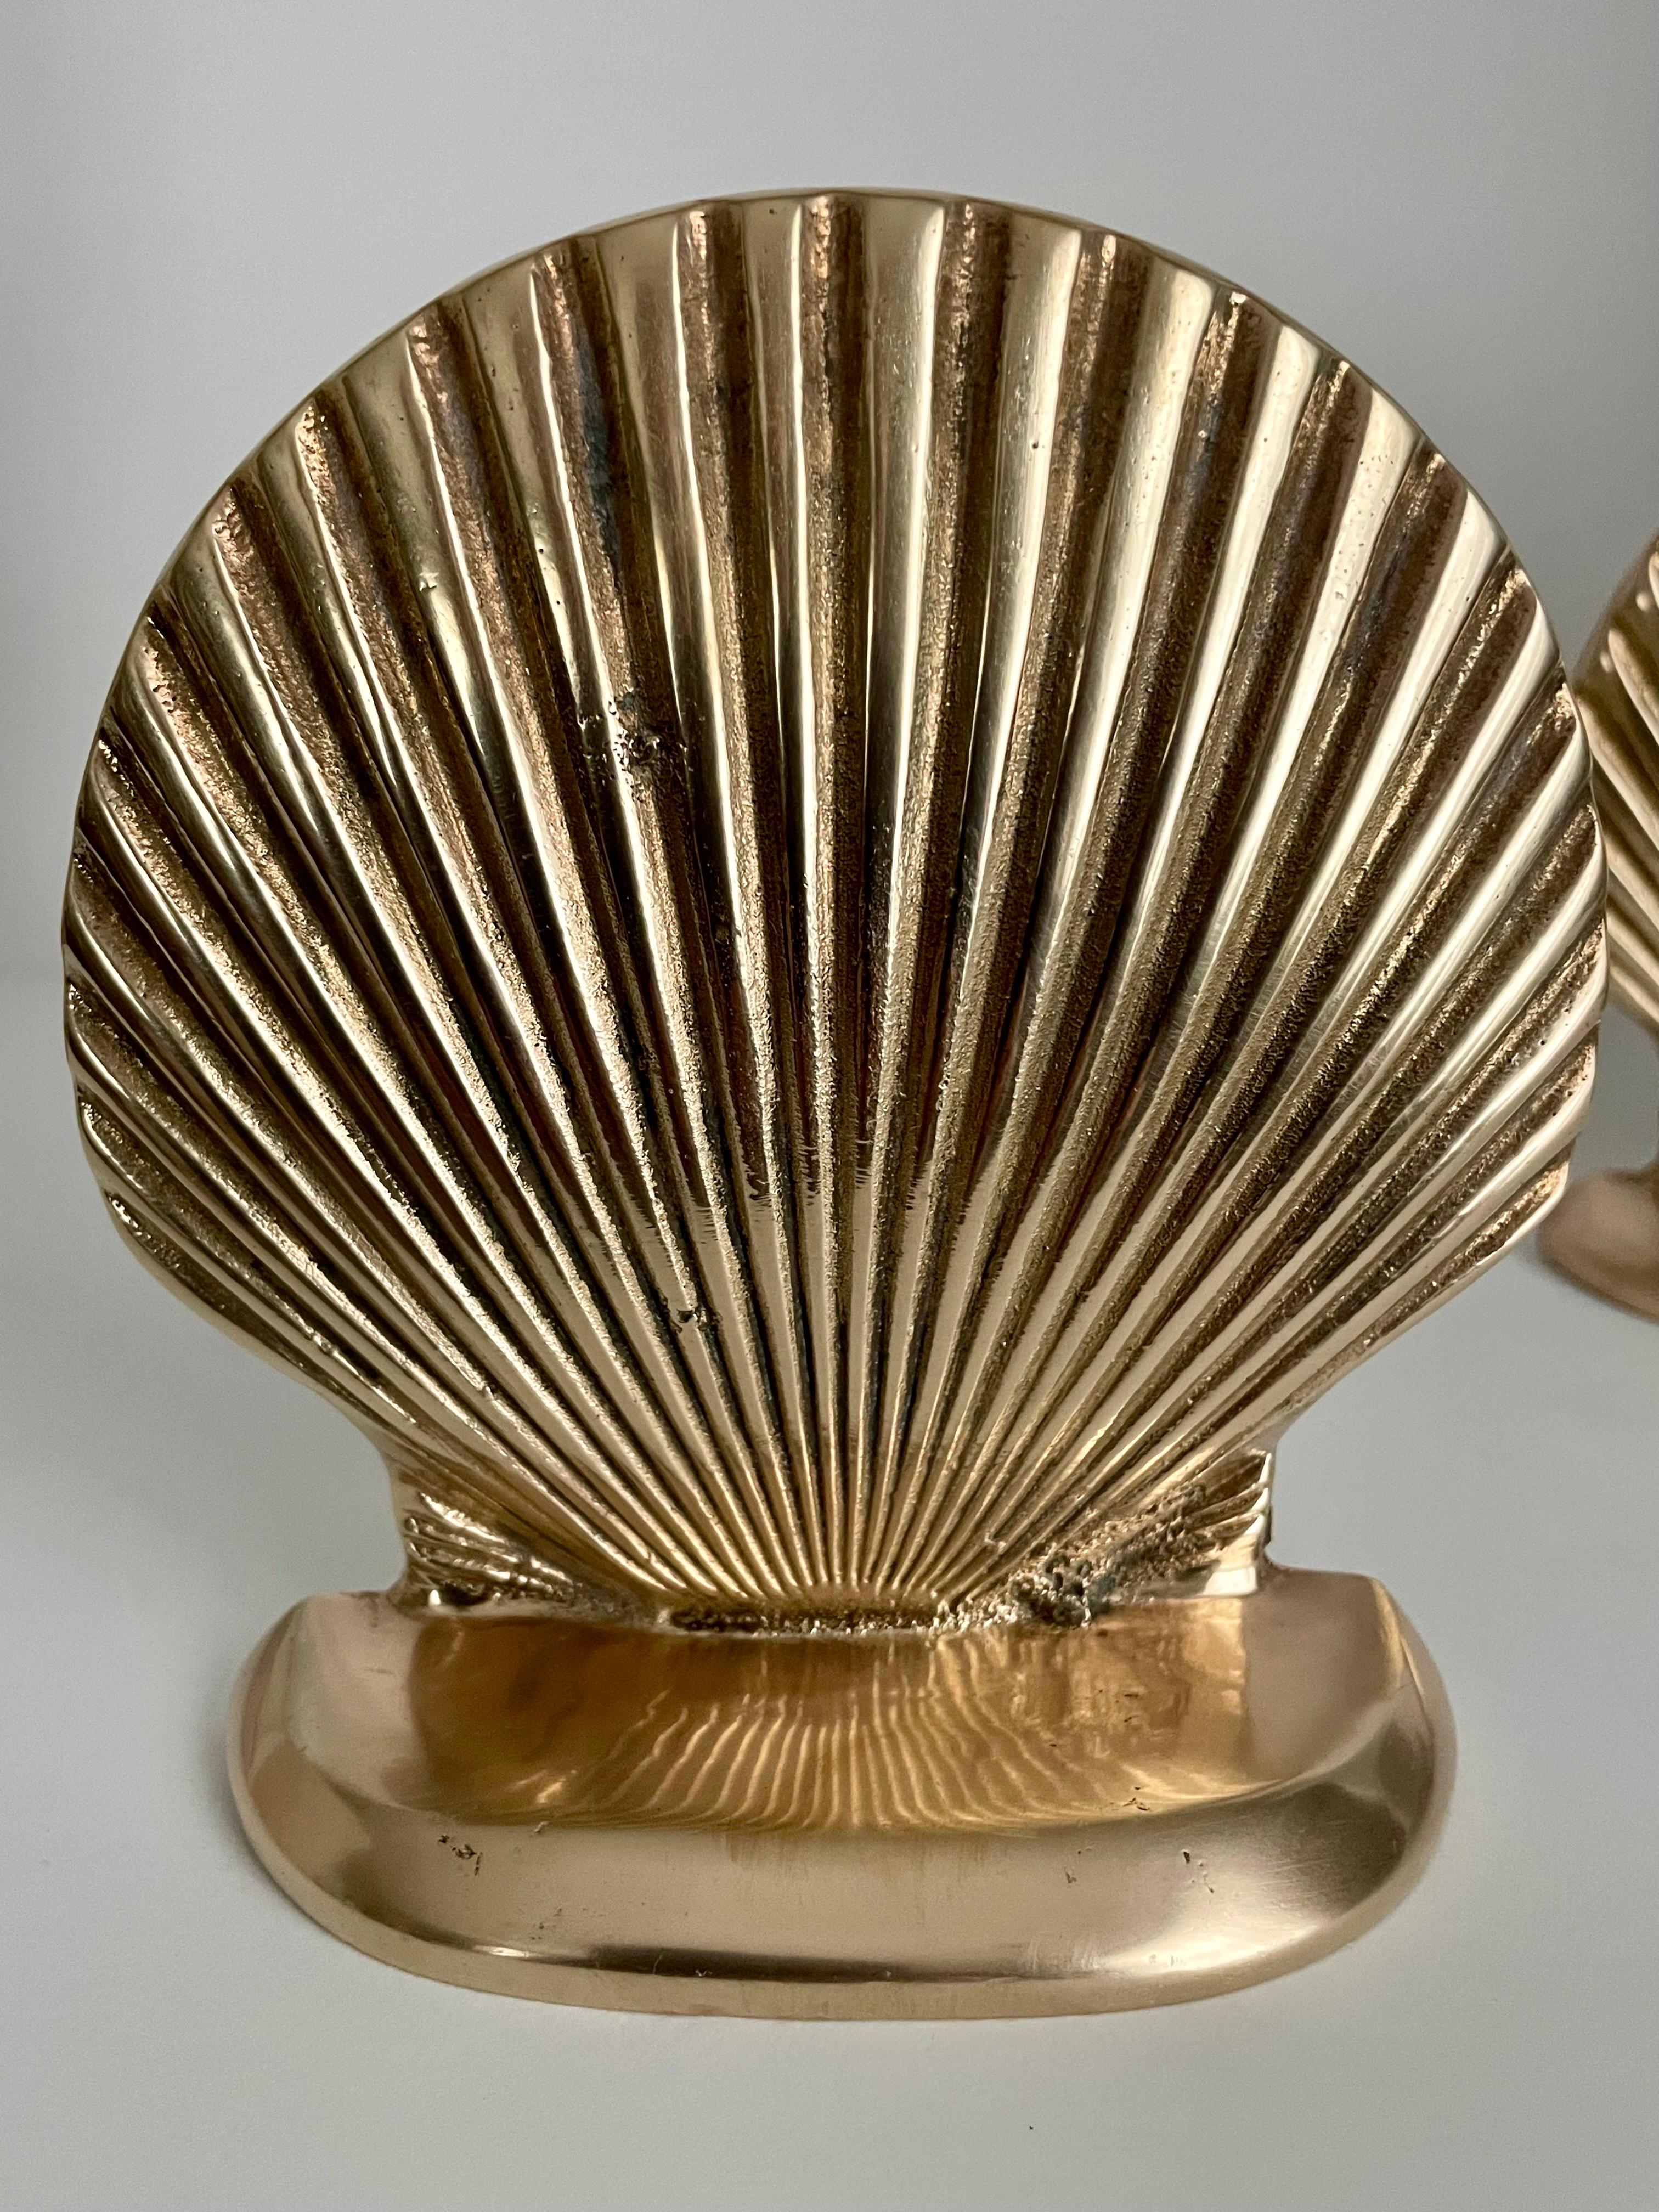 Hollywood Regency Vintage Brass Clam or Scallop Shell Seashell Bookends For Sale